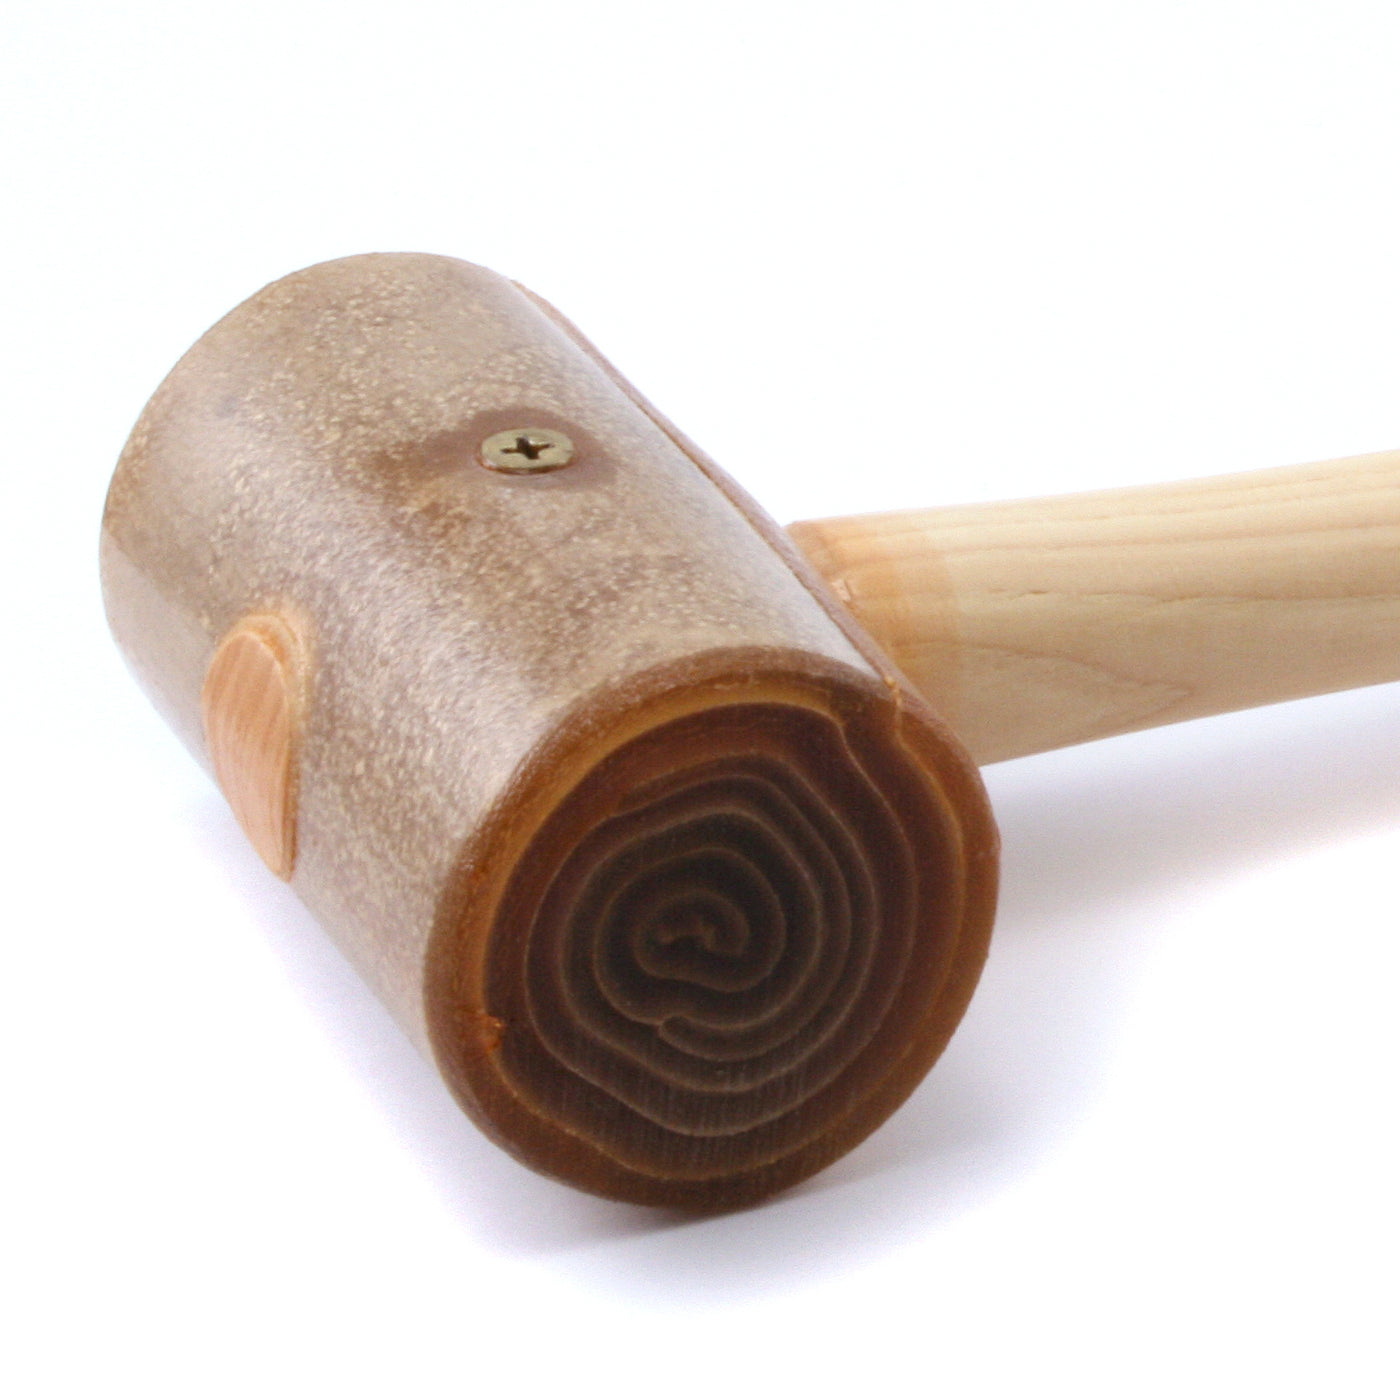 Rawhide Mallet Hammer 1, Quality Made Jewelry Hammer